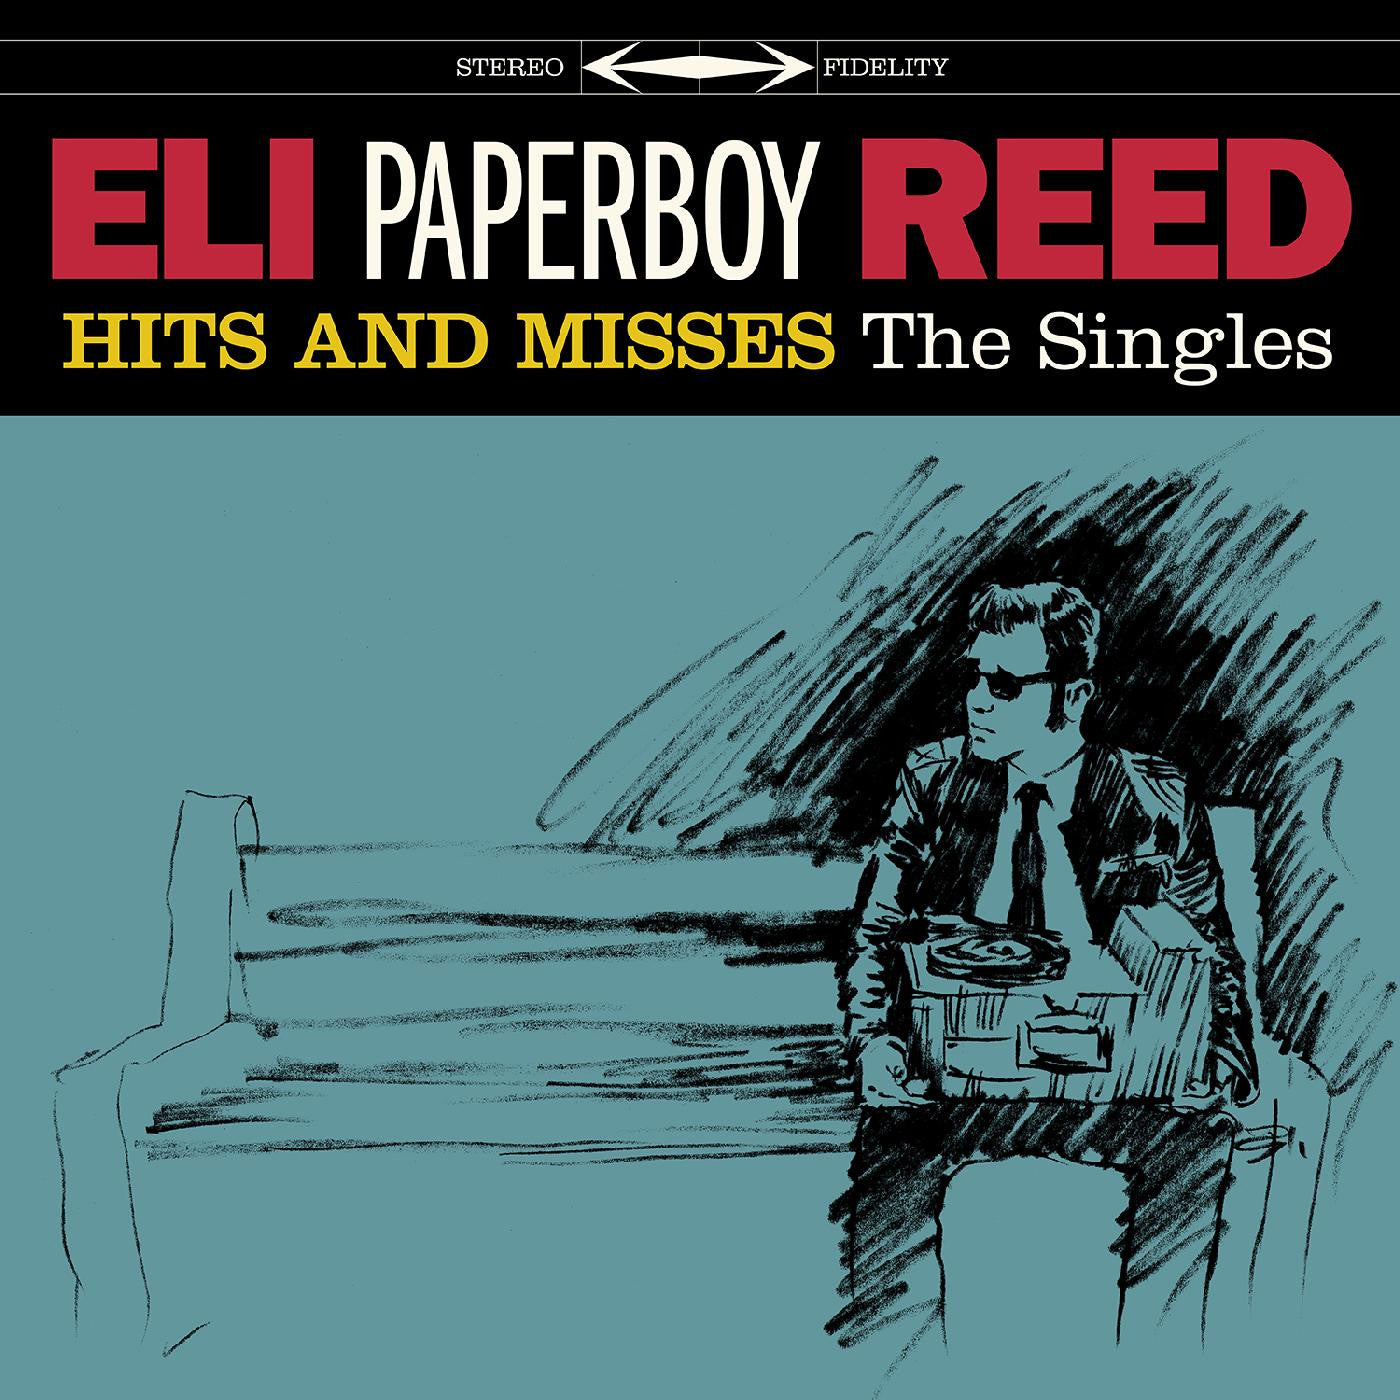 ELI PAPERBOY REED - HITS AND MISSES: THE SINGLES Vinyl LP